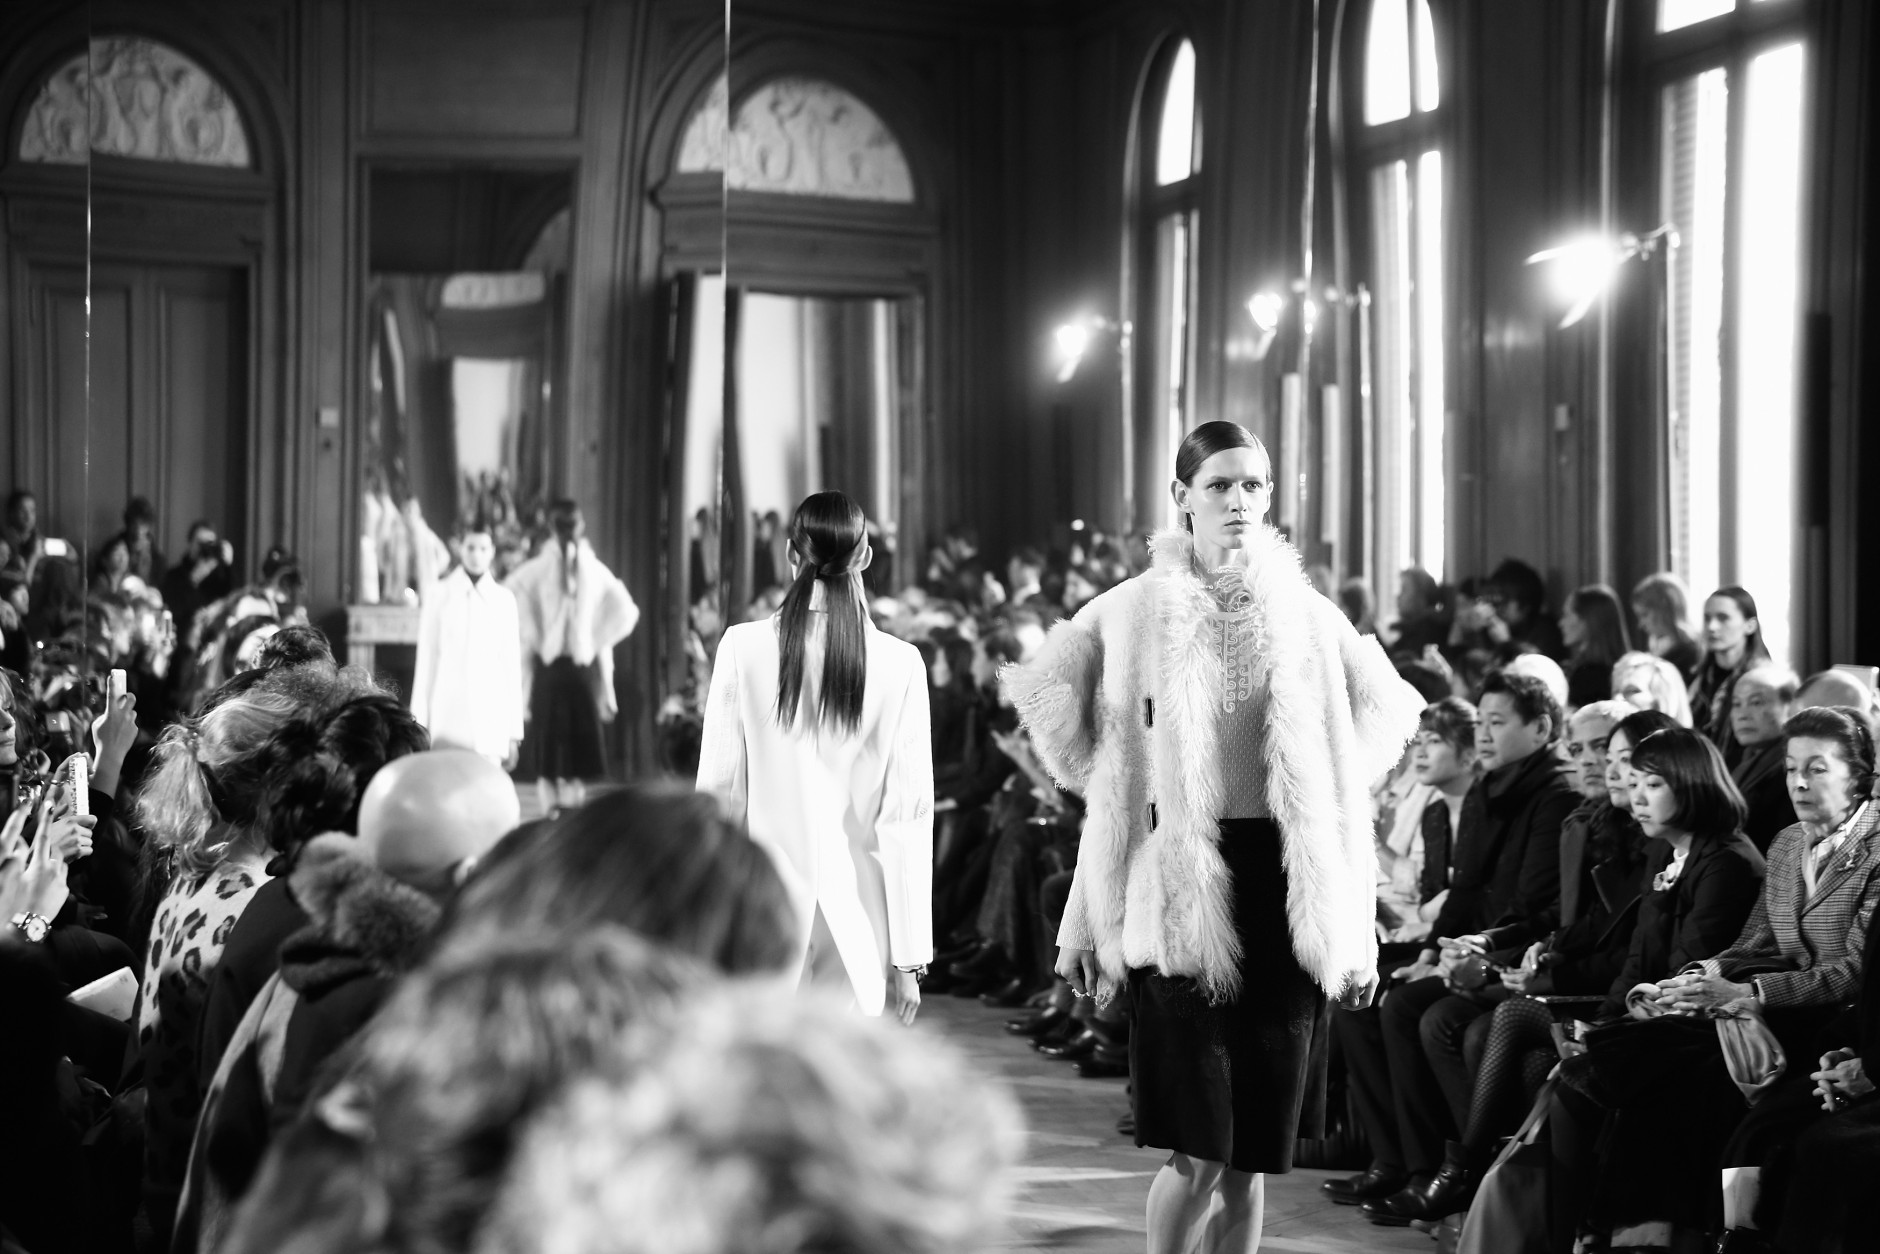 PARIS, FRANCE - MARCH 04:  (EDITORS NOTE: Image has been converted to black and white)  A model walks the runway during the Sharon Wauchob show as part of Paris Fashion Week Womenswear Fall/Winter 2015/2016 on March 4, 2015 in Paris, France.  (Photo by Andreas Rentz/Getty Images)